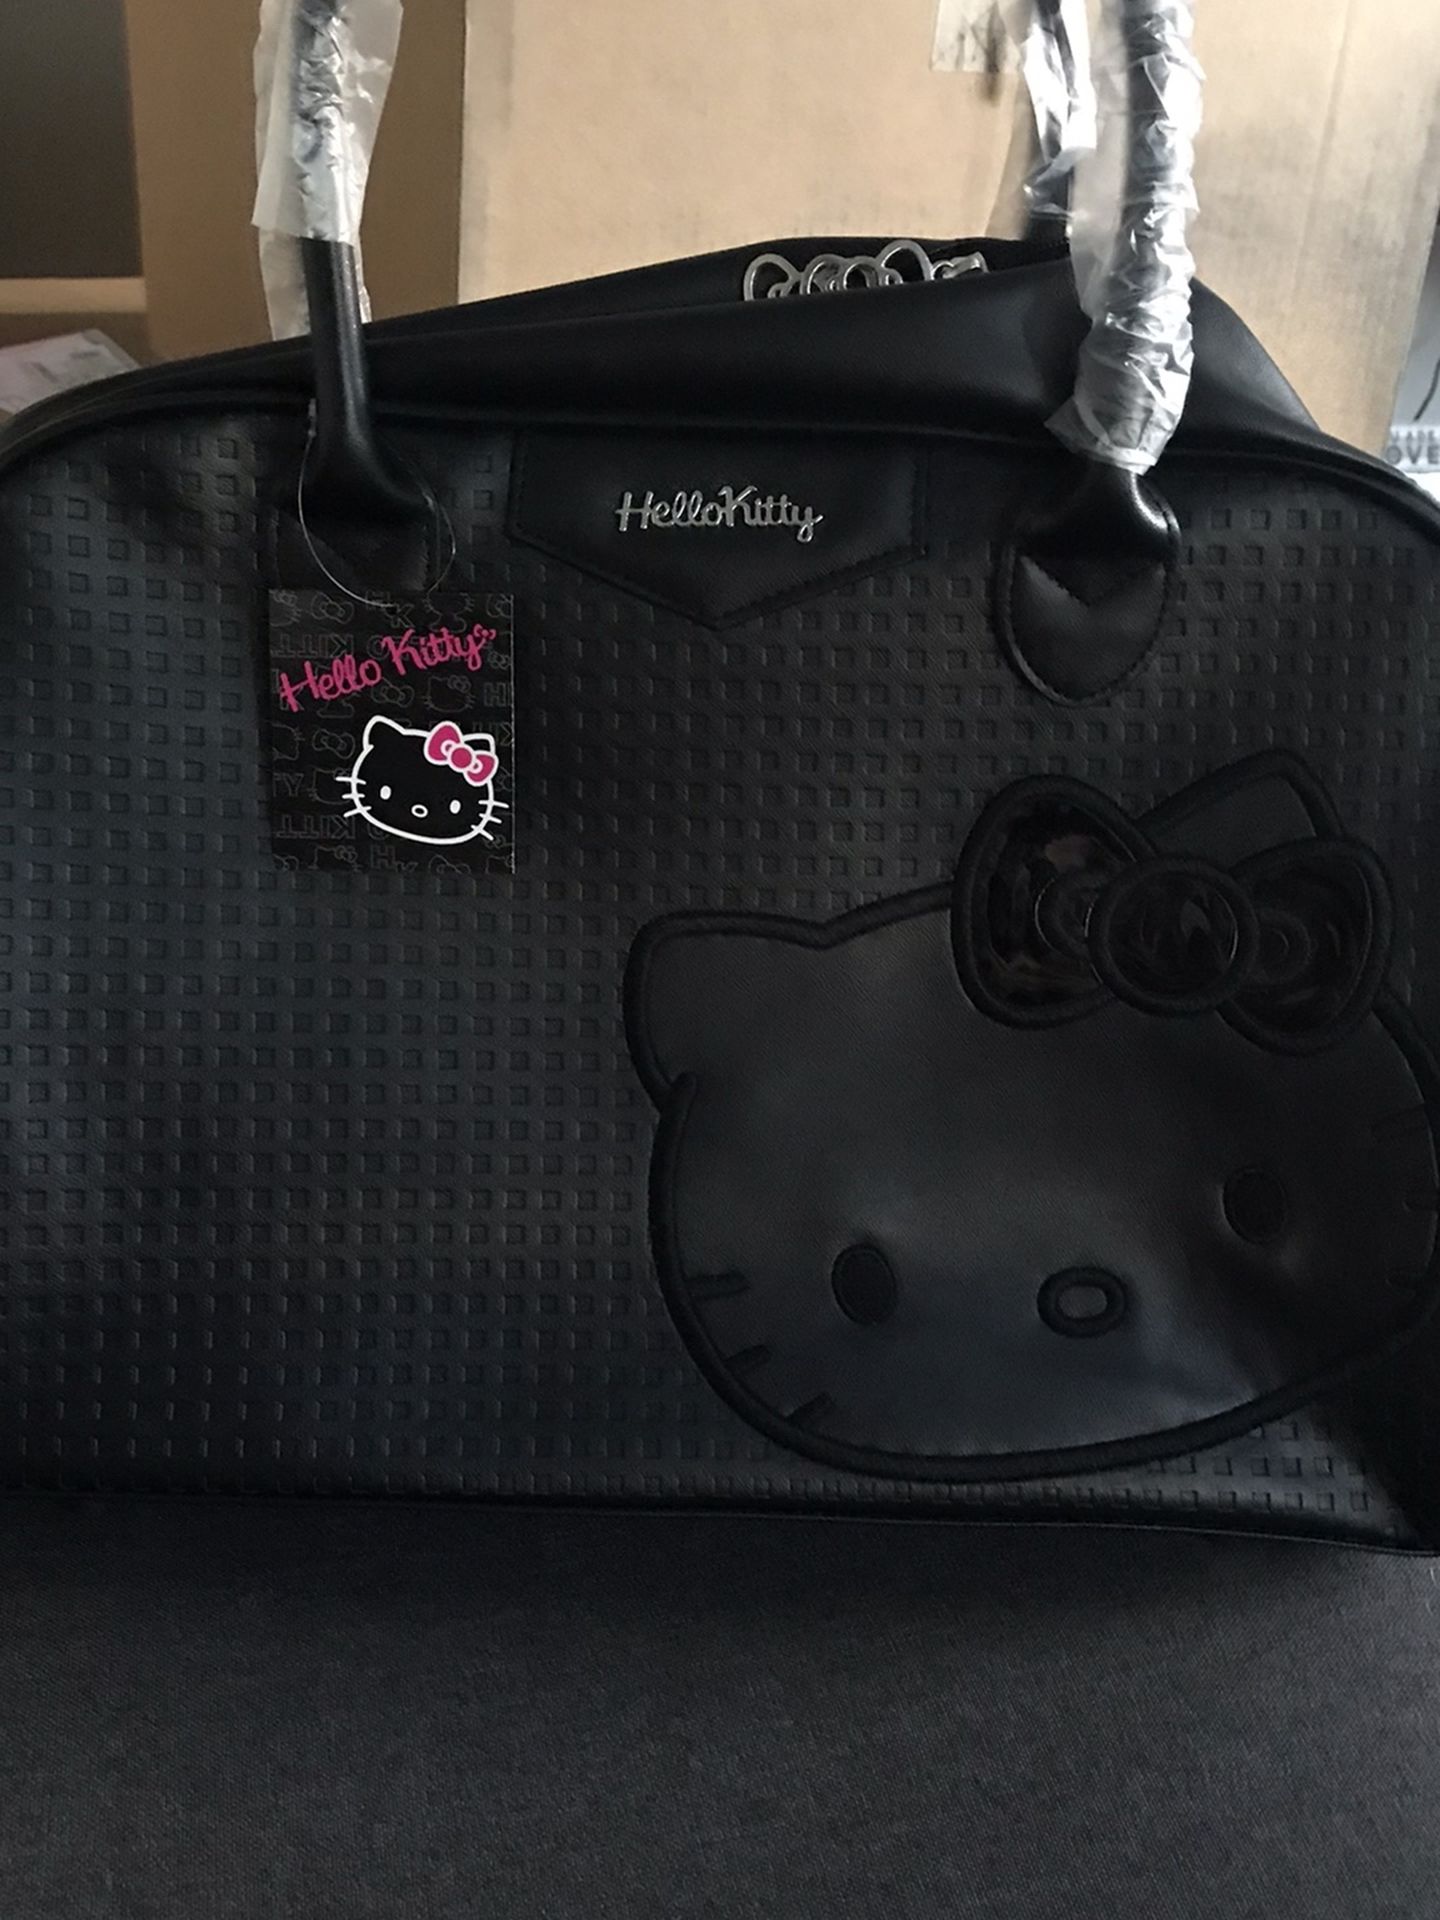 Brand new hello kitty Purse Still Has Tags If Picked Up I Can Lower Delivery Fees